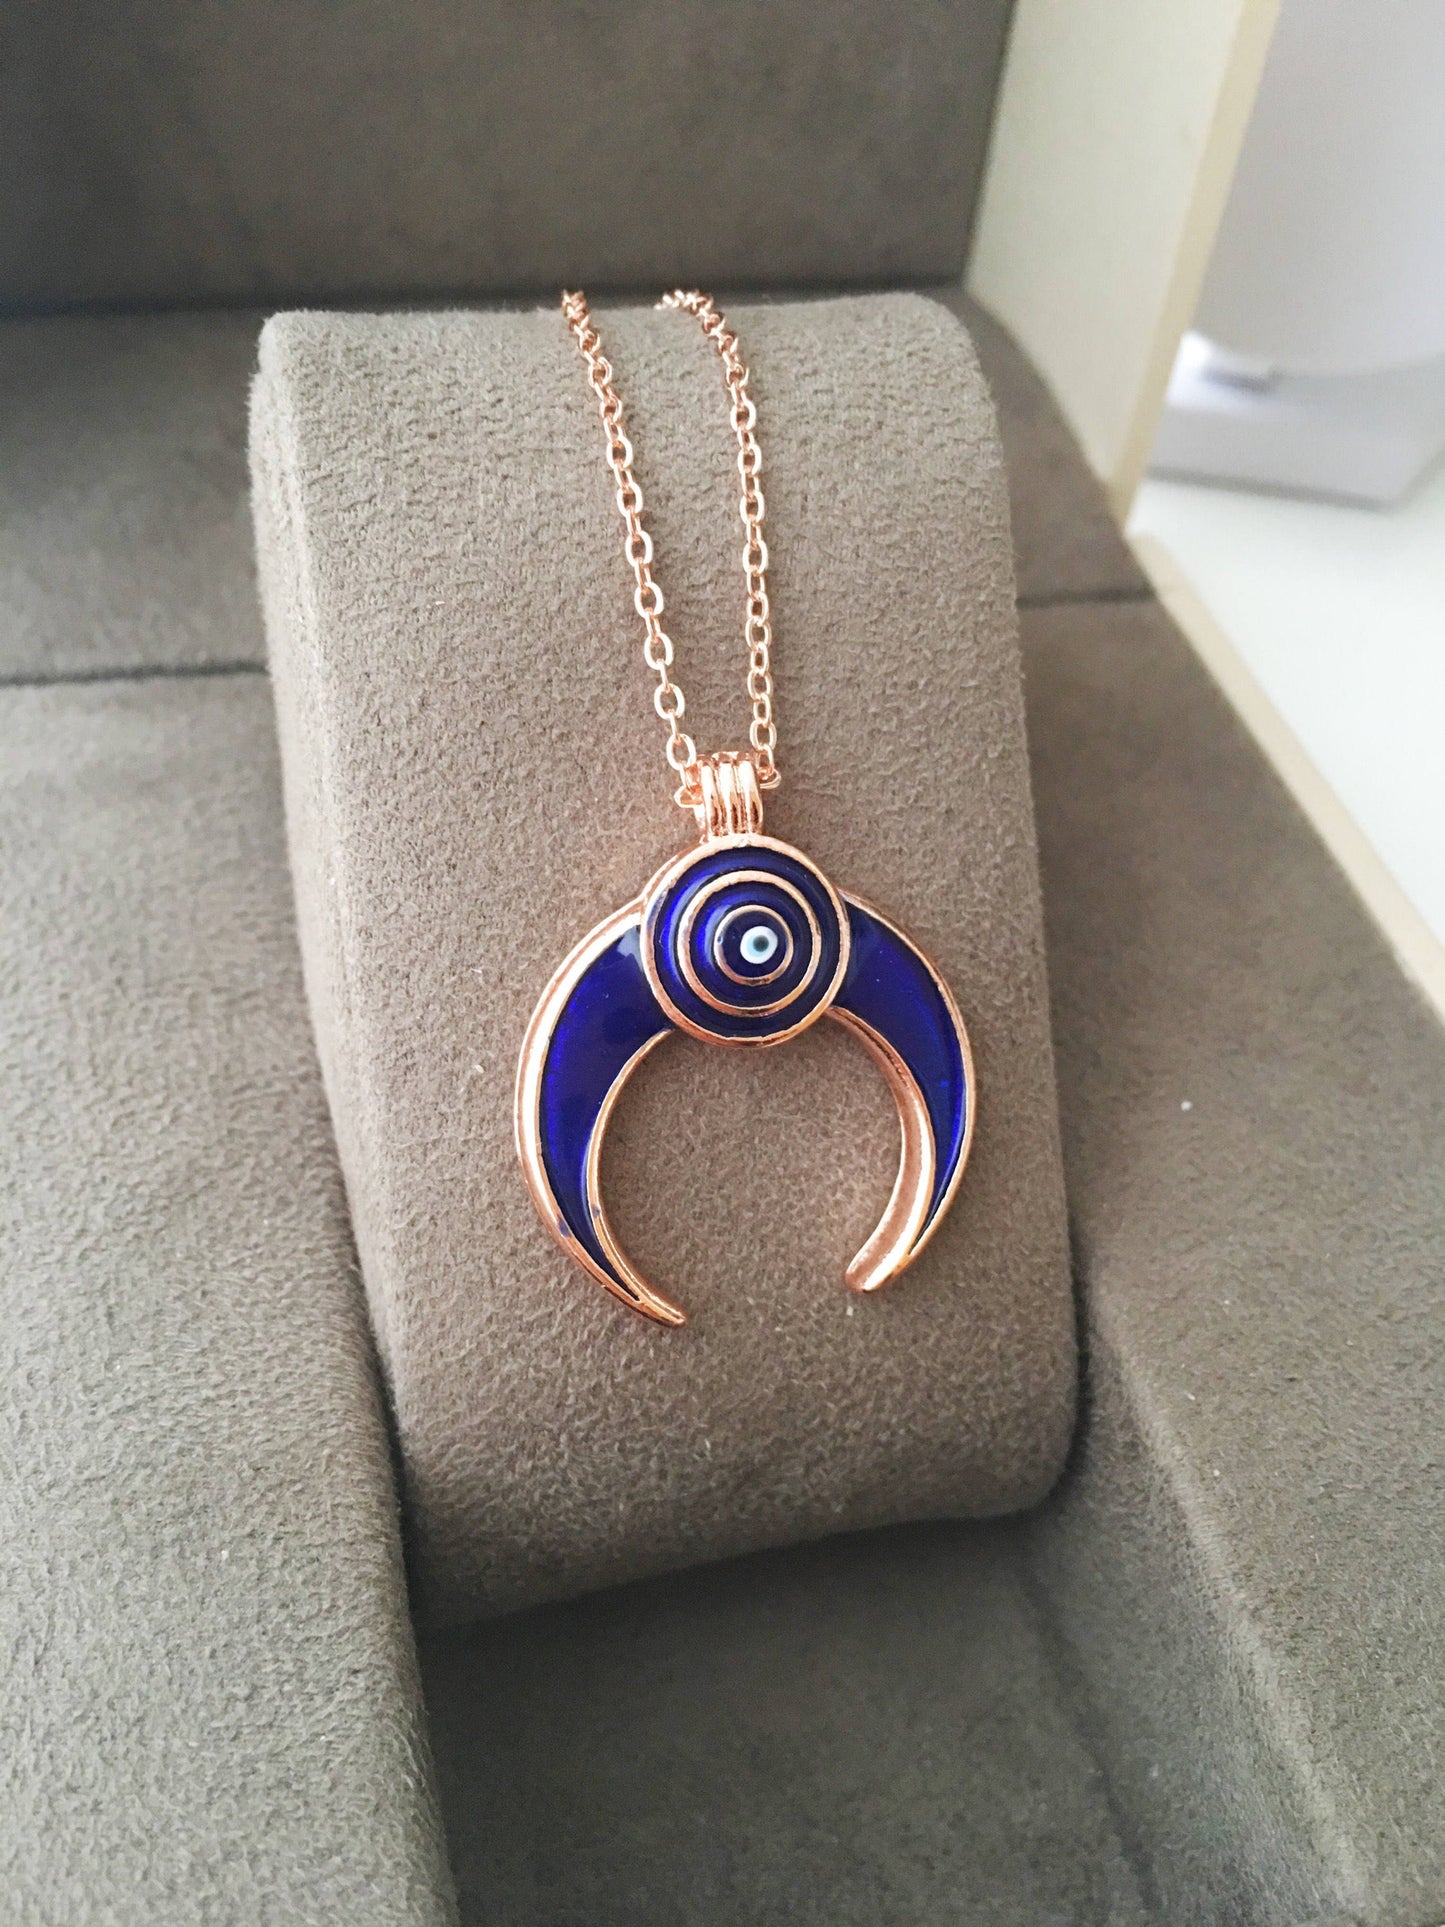 Double Horn necklace, Evil Eye necklace, Crescent Moon necklace